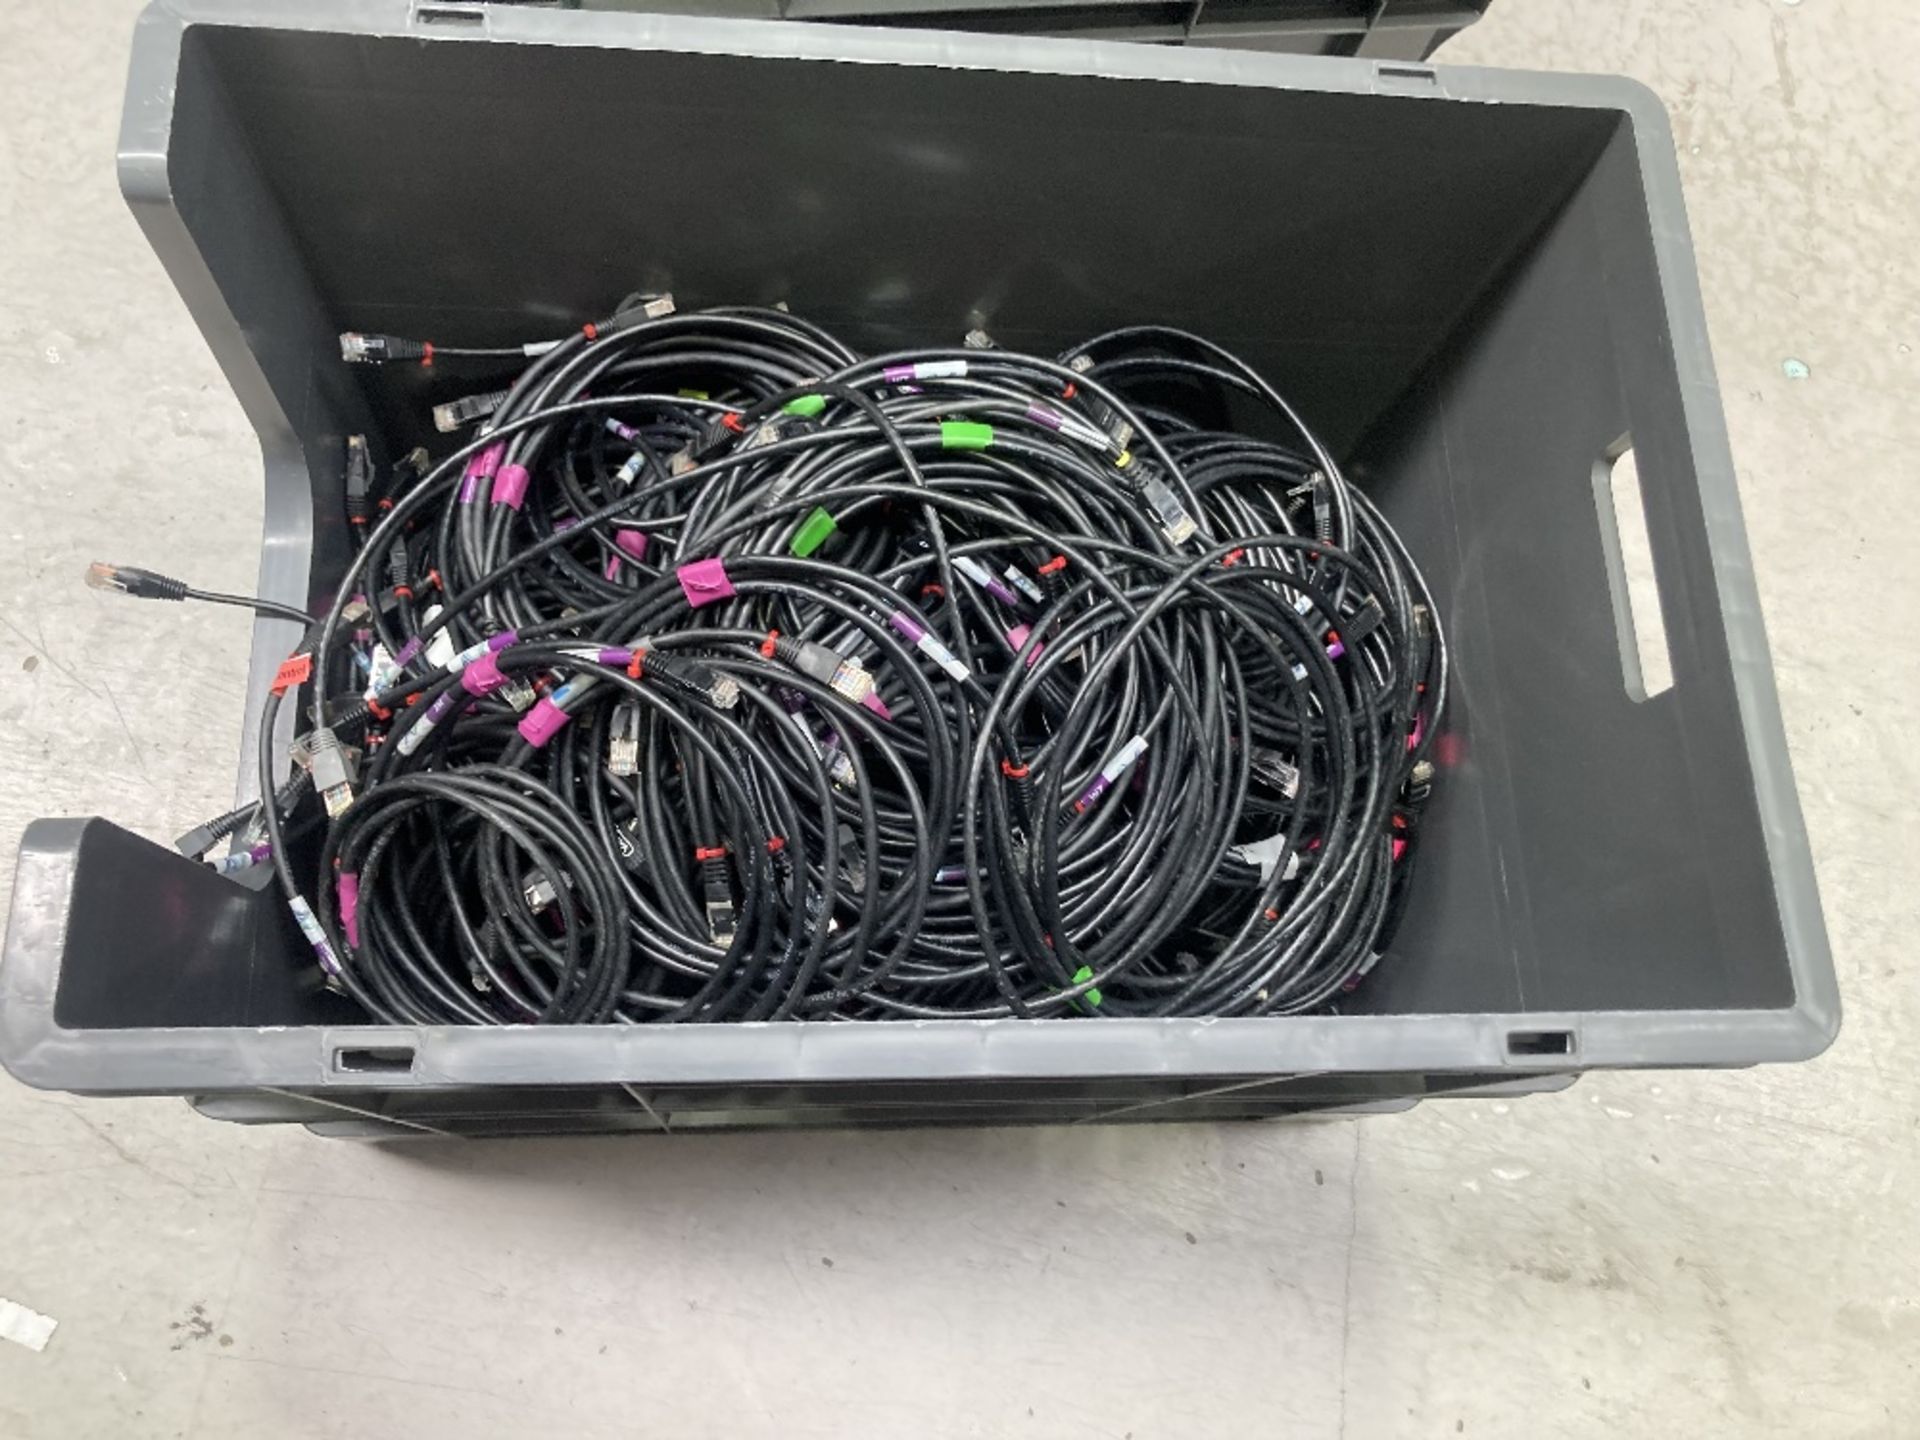 Large Quantity of 2m Ethernet Cable CAT6 with Plastic Lin Bin - Image 3 of 3